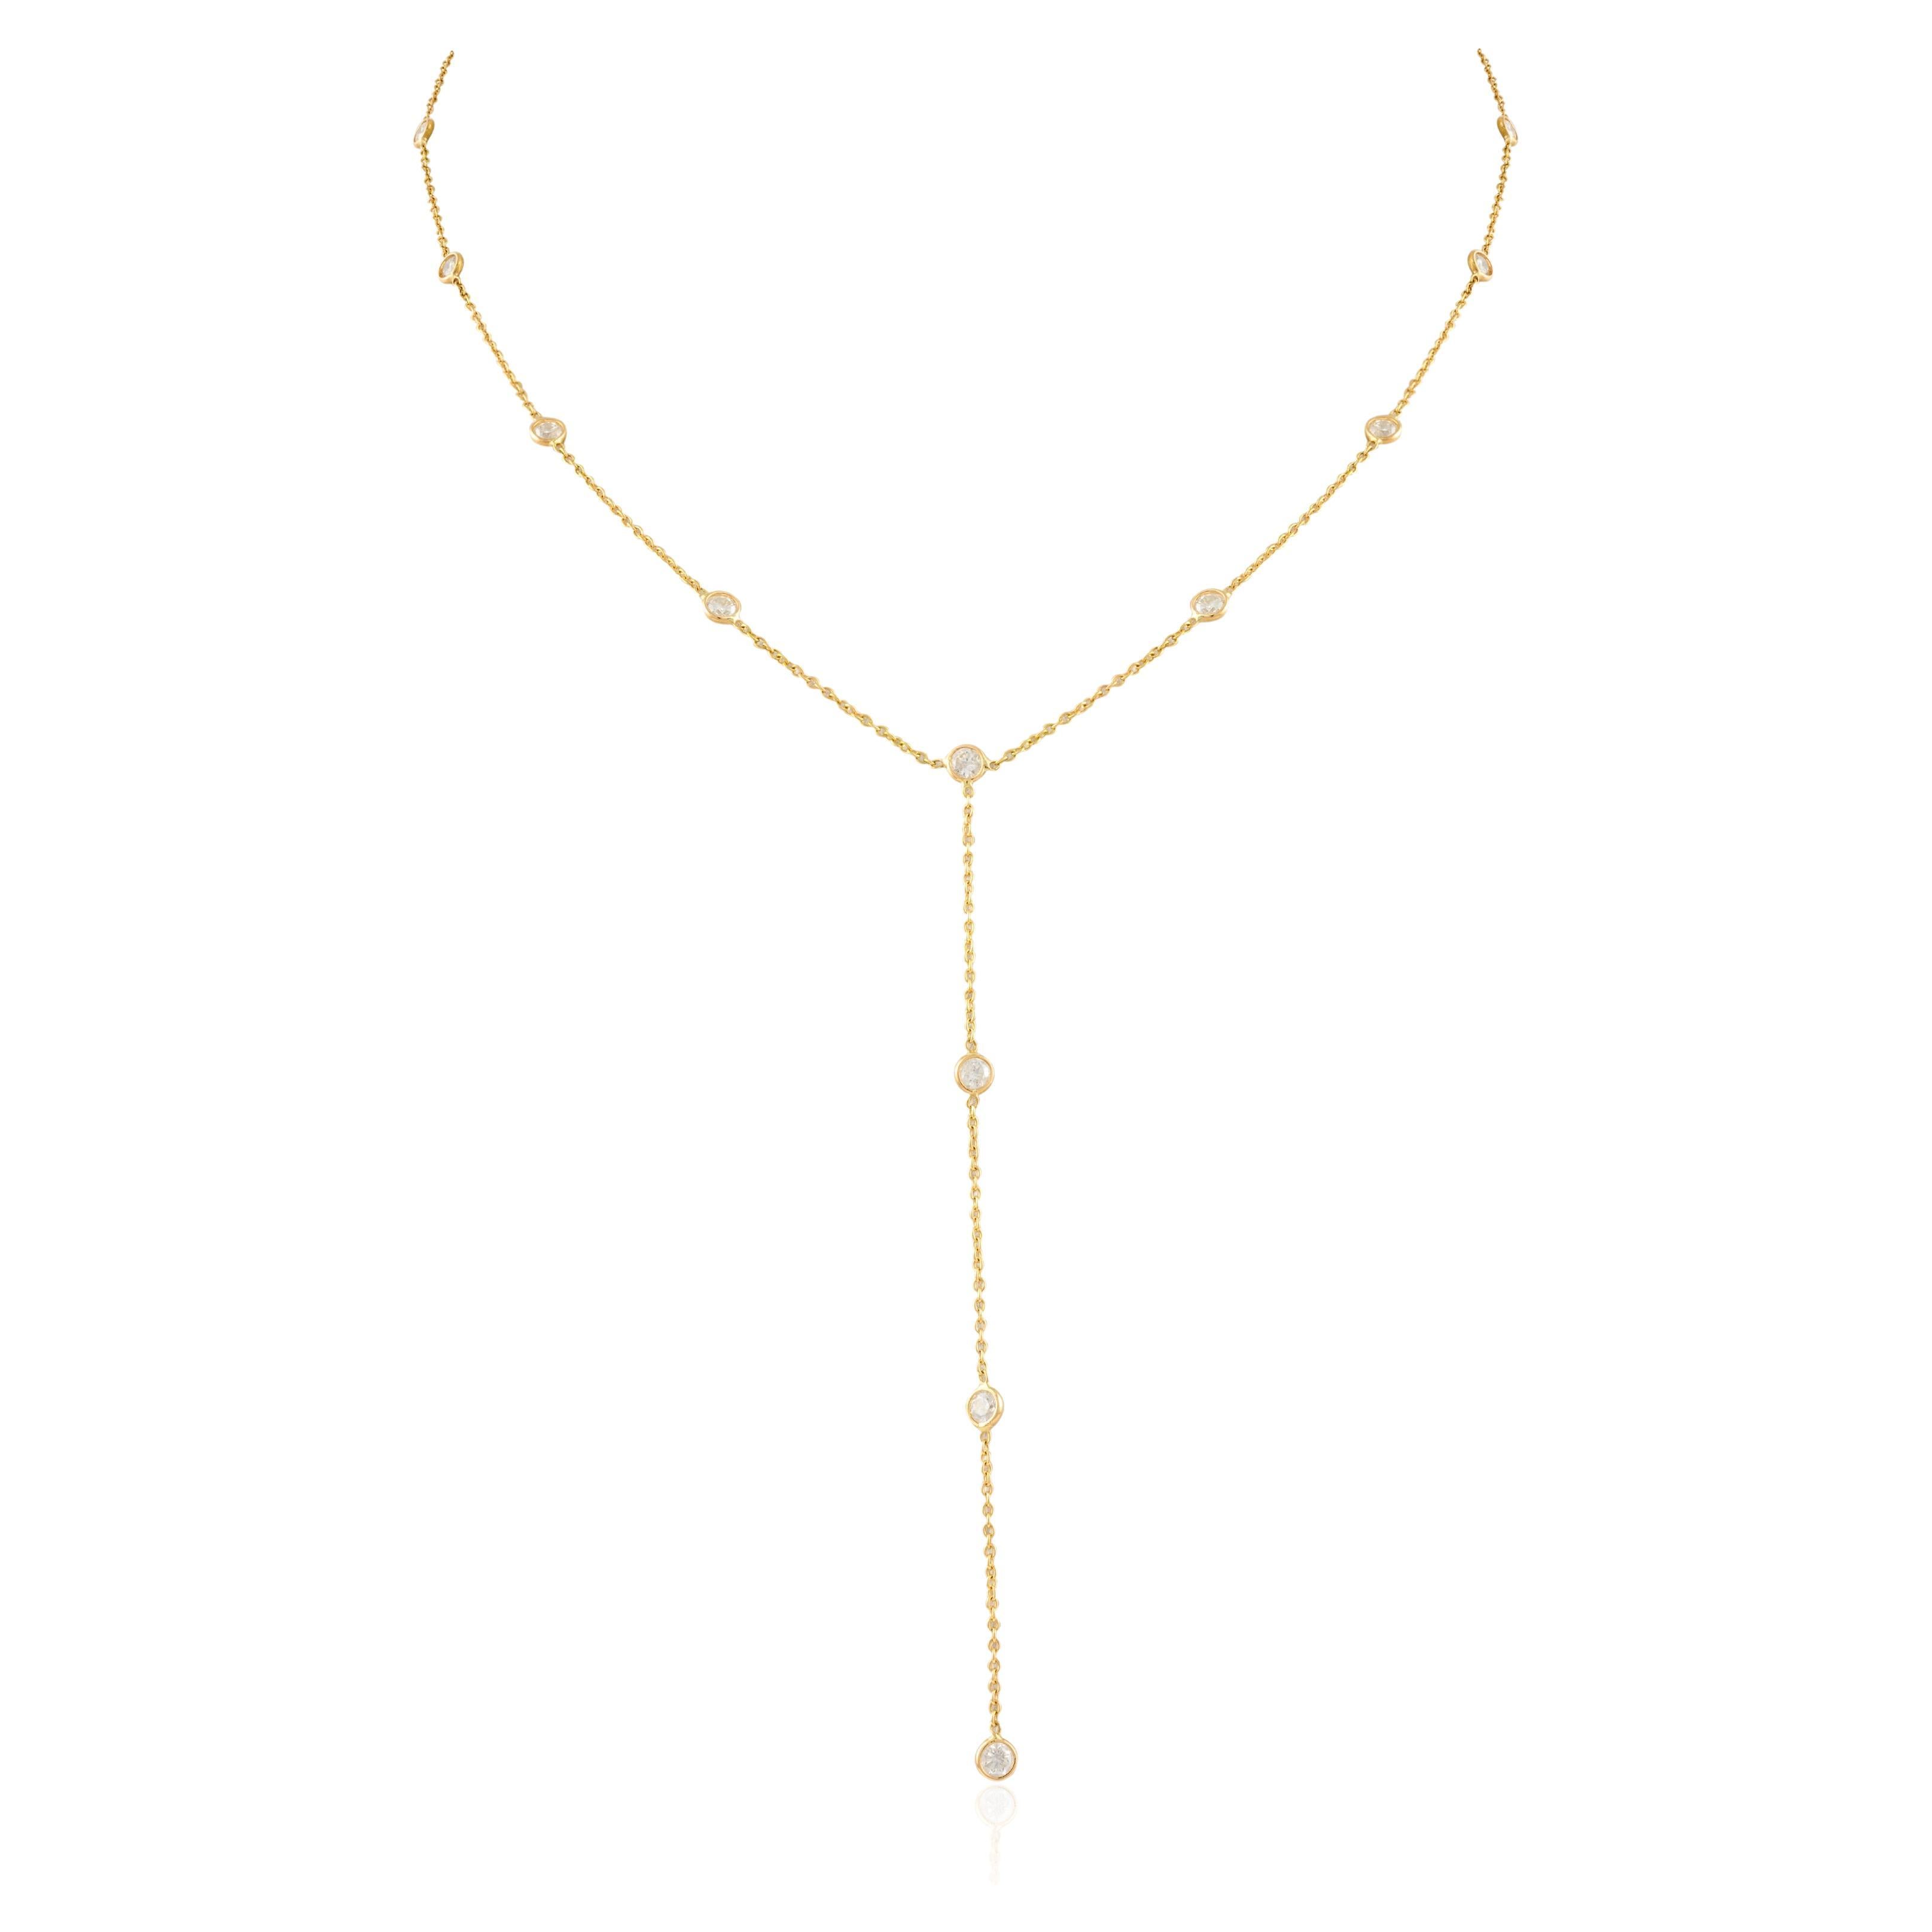 18kt Solid Yellow Gold 1 CTW Diamond Lariat Necklace, Gift For Her Christmas For Sale